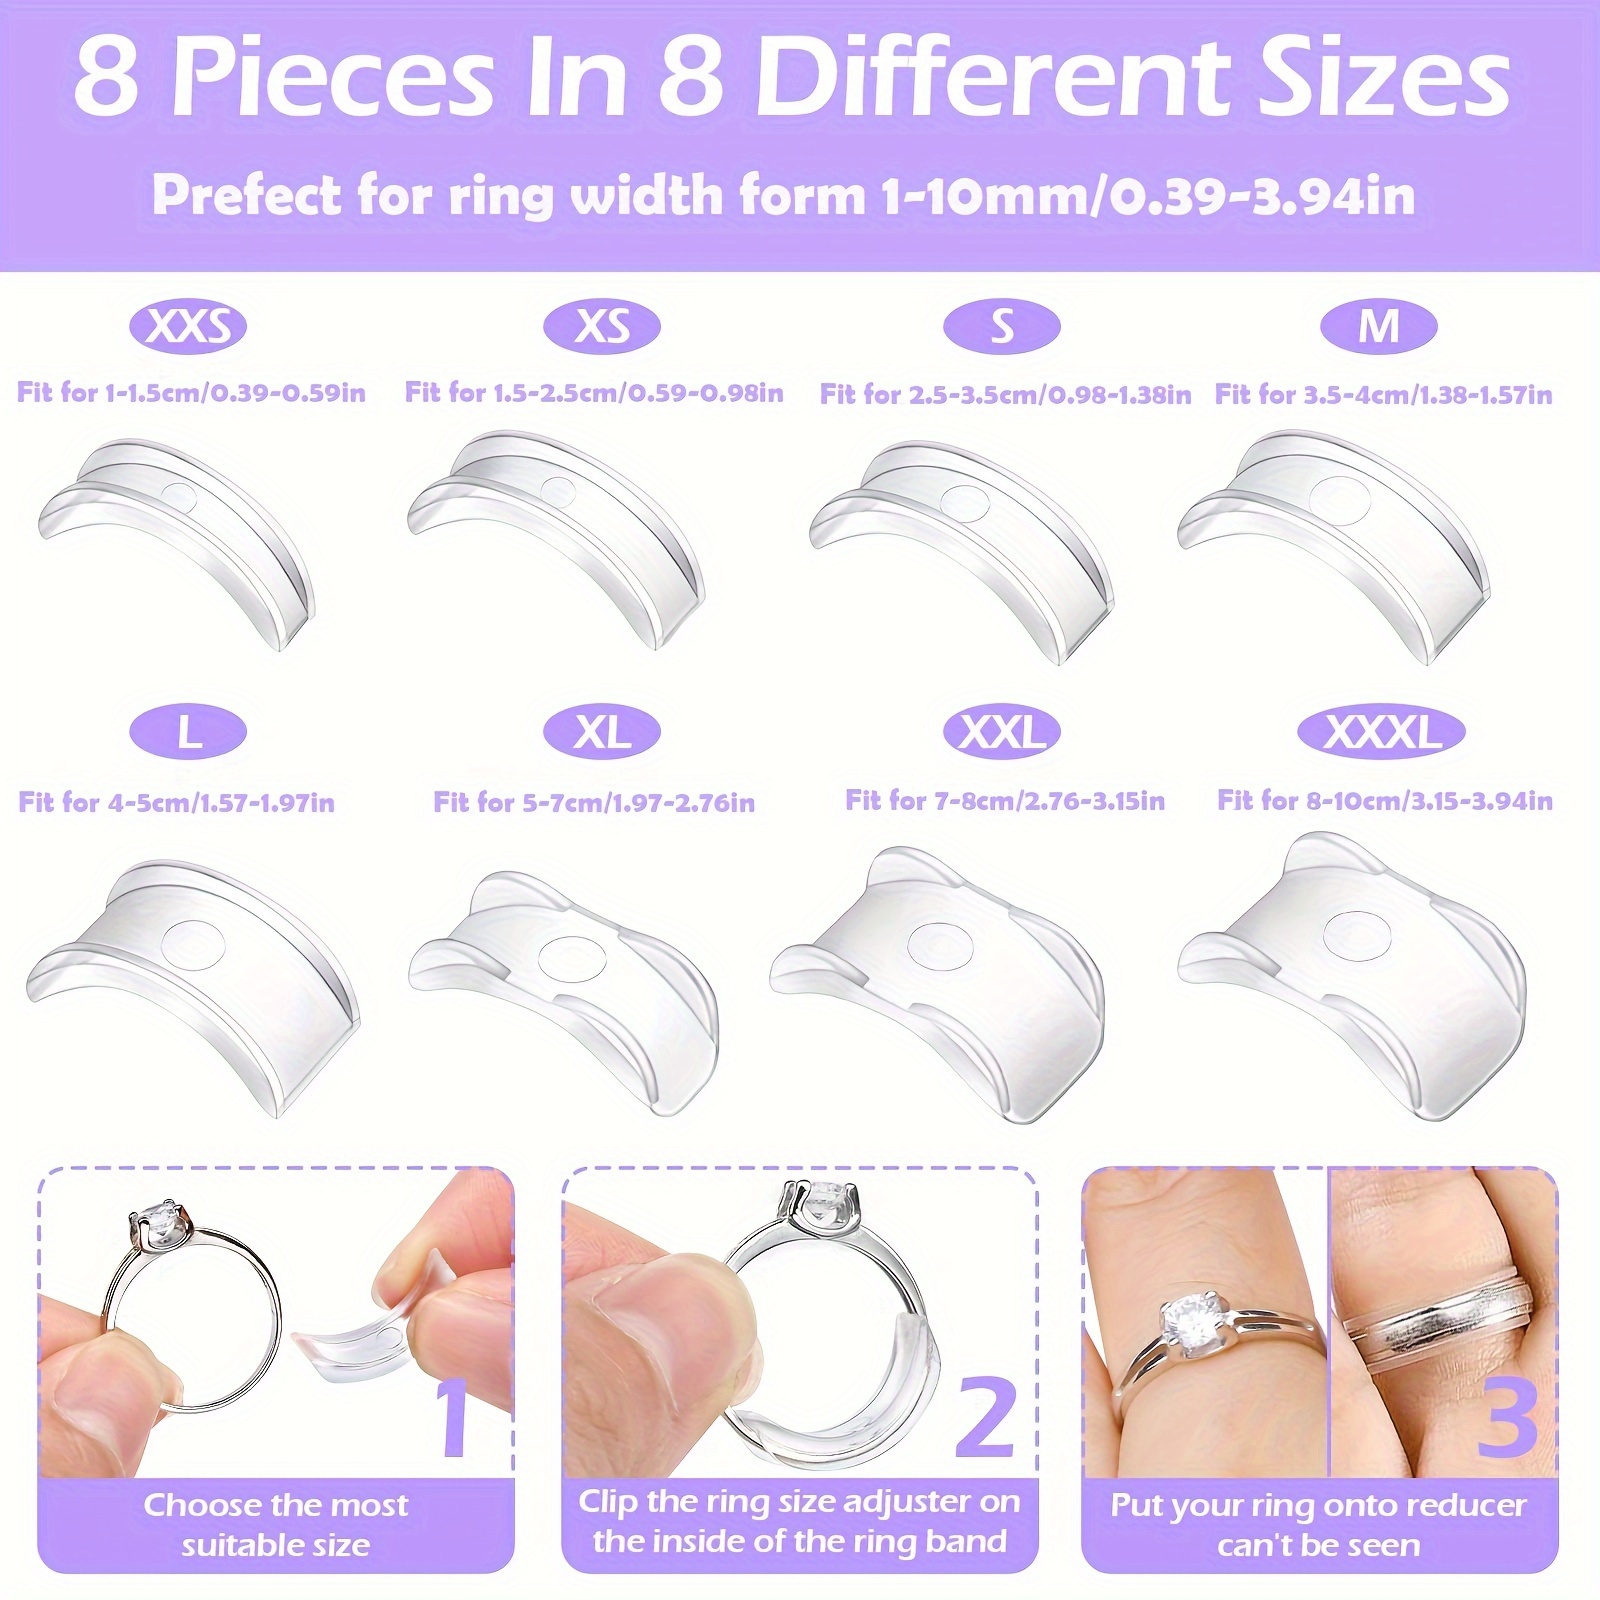 70 Pcs Ring Size Adjuster for Loose Rings with Ring Size Measuring Tool for Ring Adjuster, Plug-In Invisible Ring Spiral Silicone Tightener with Wome